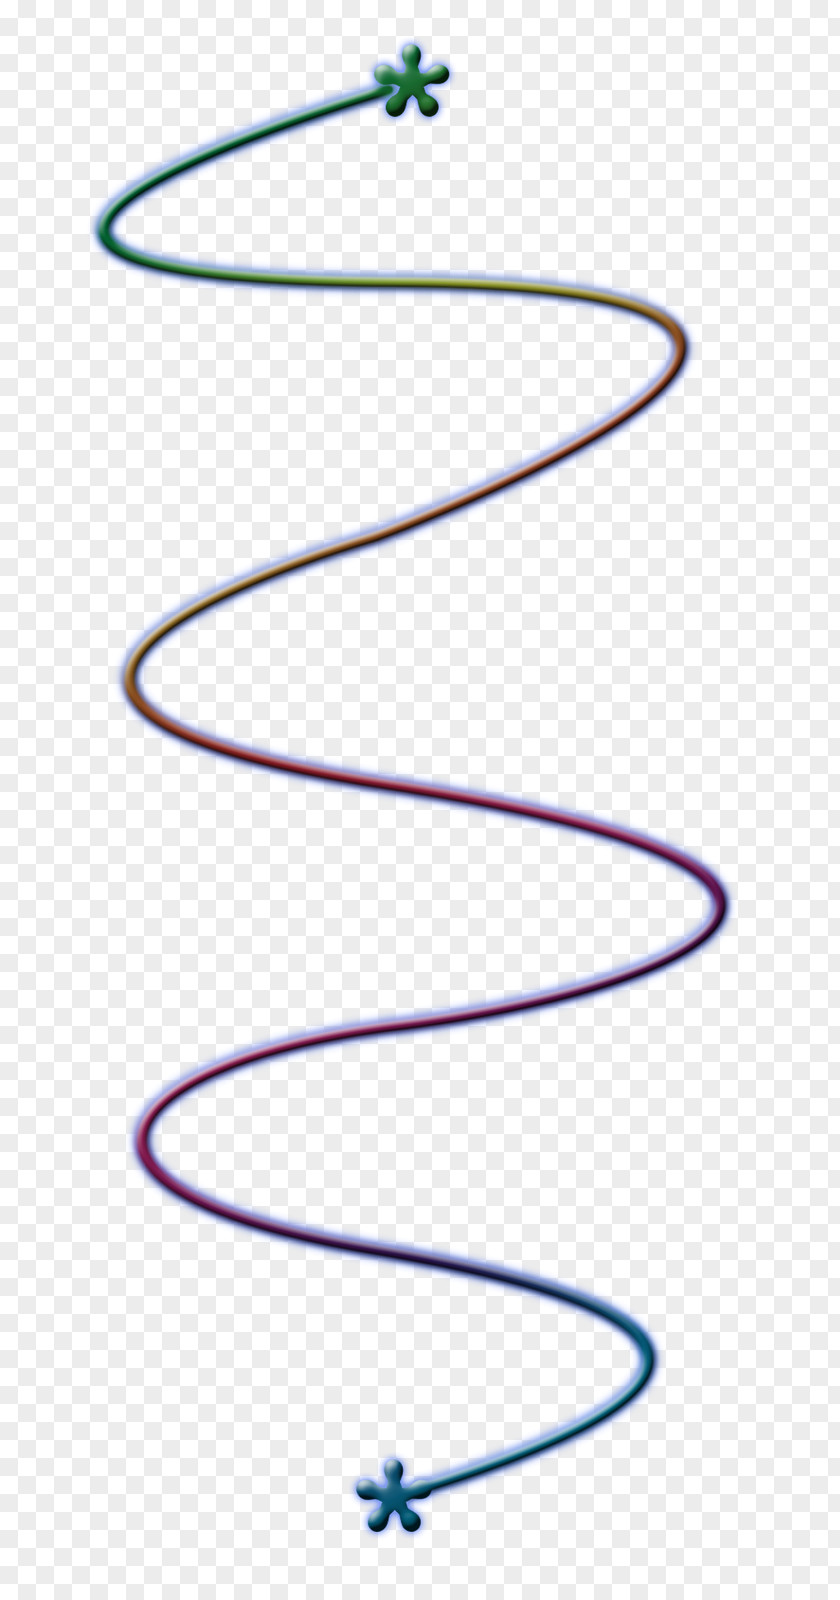 Swirls Hashtag Reblogging Email Text Messaging PNG